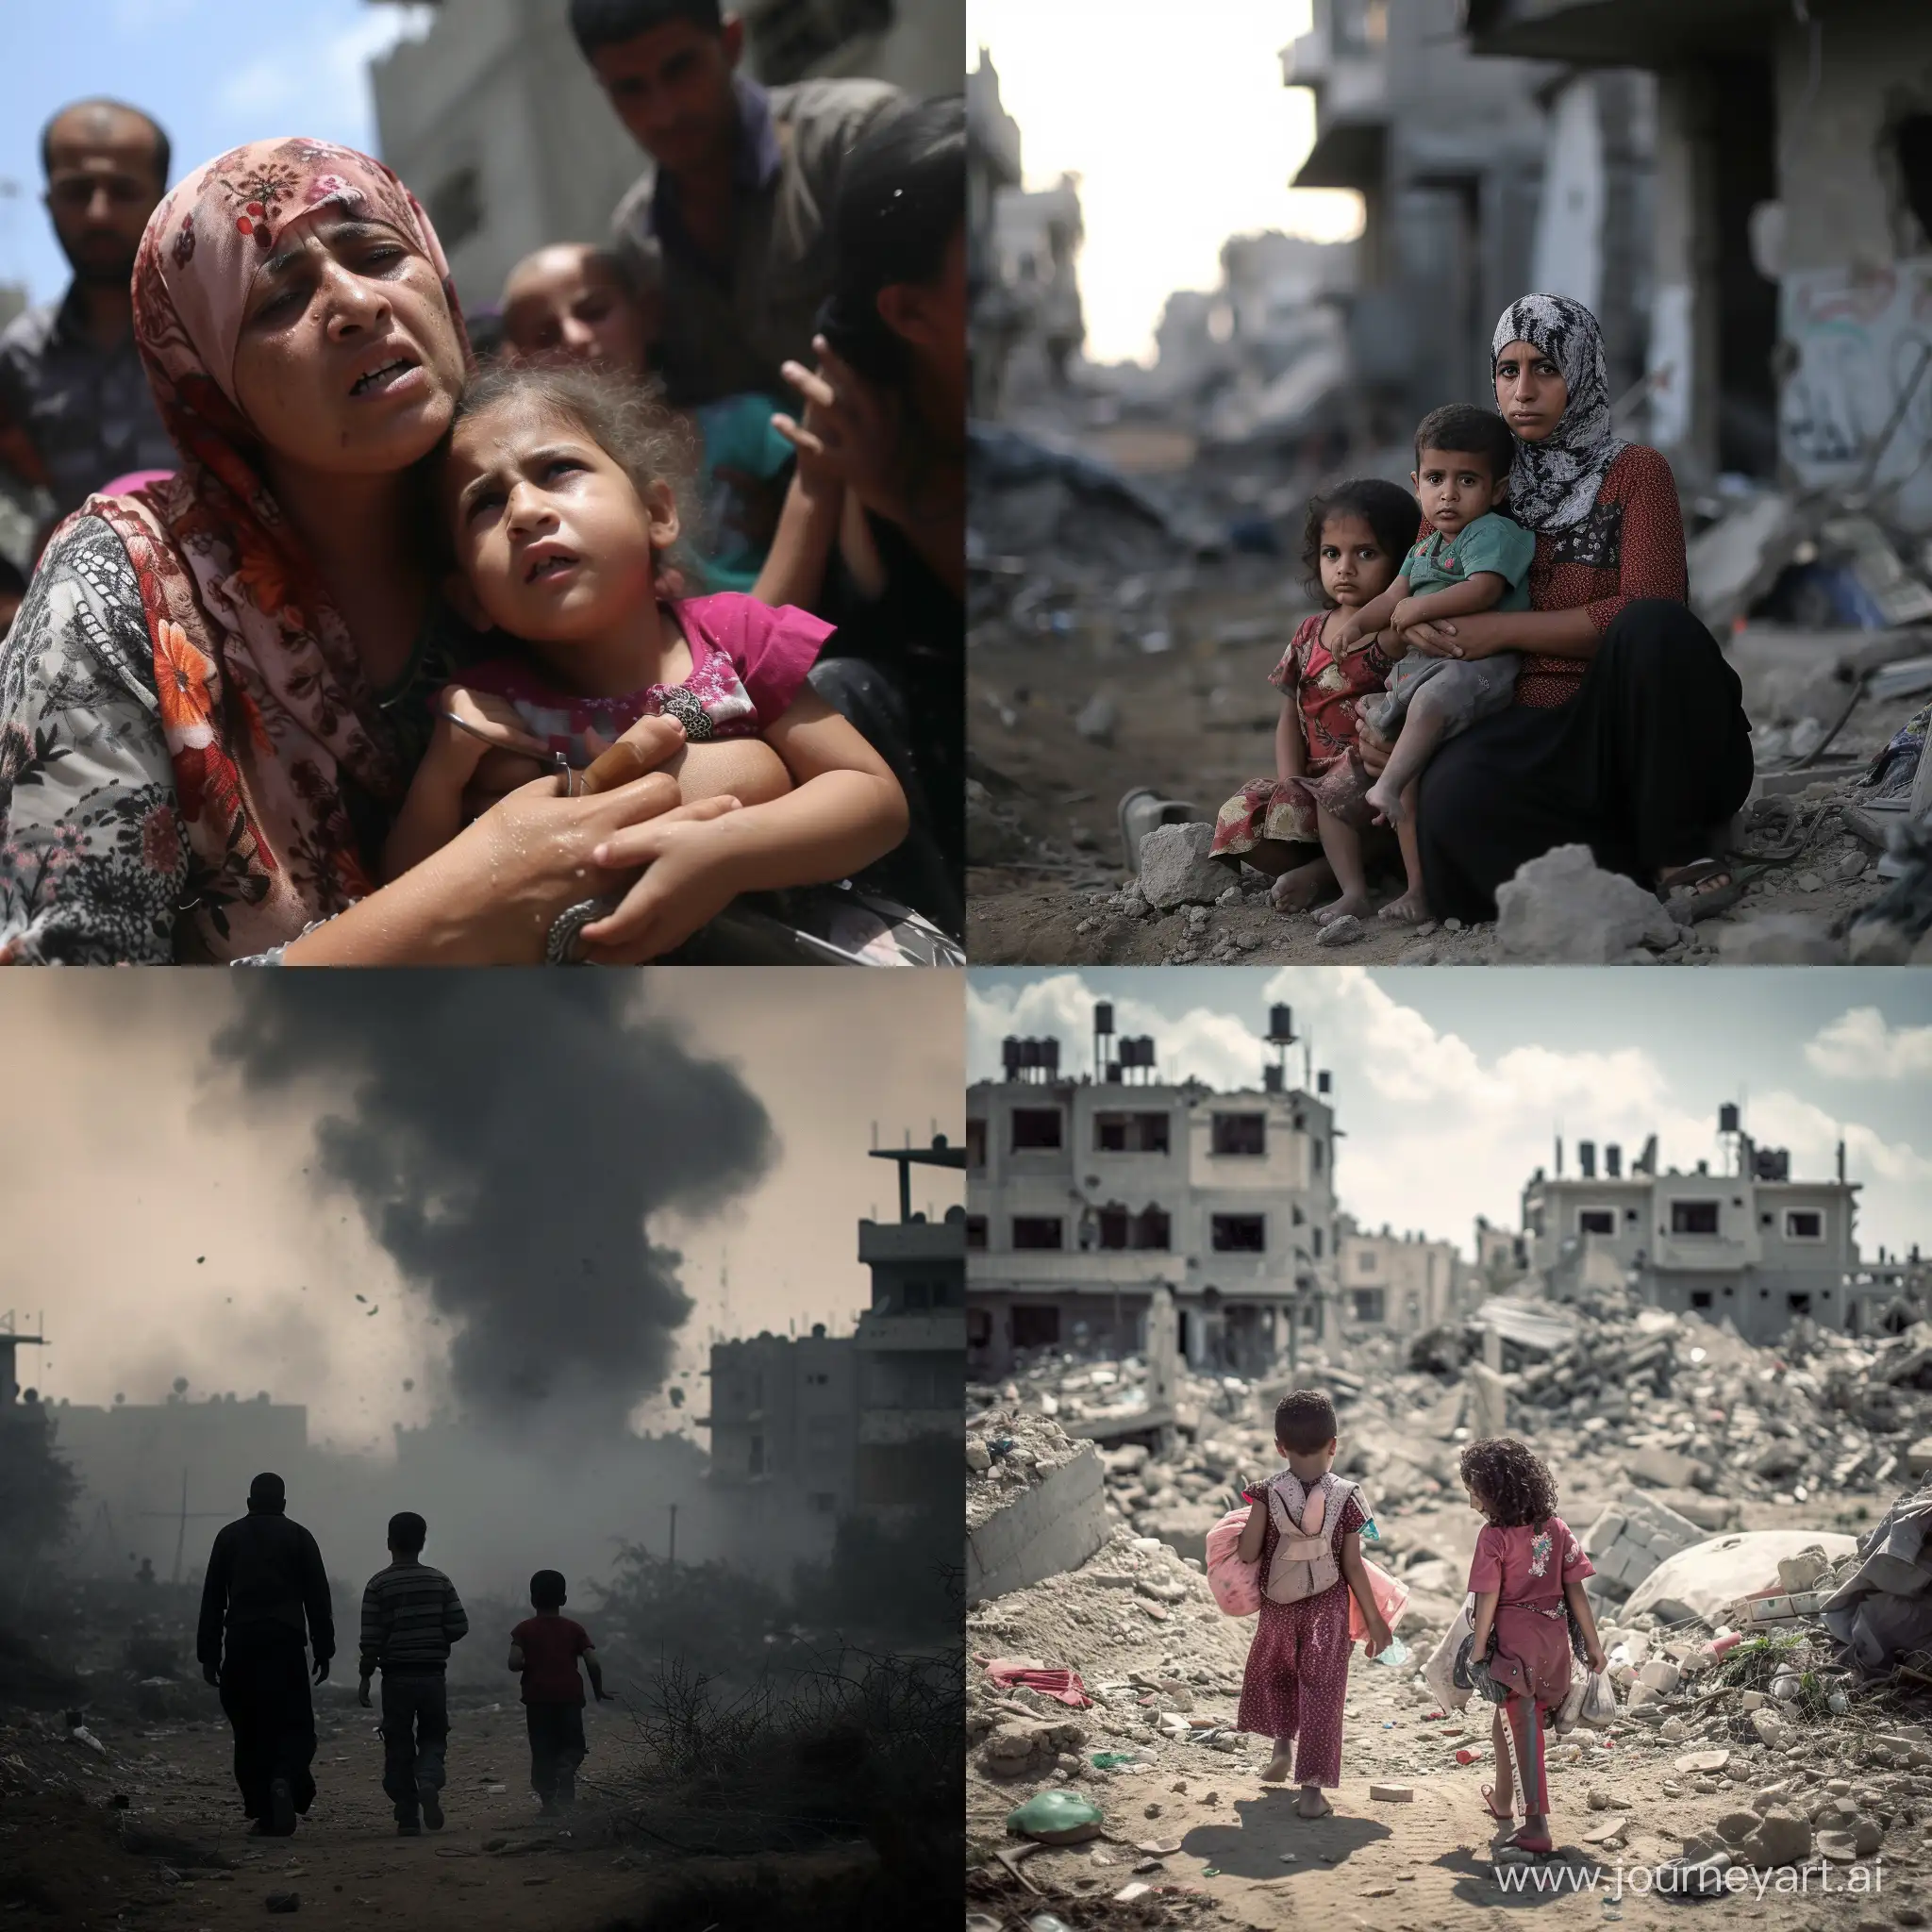 Resilience-Amidst-Hardship-Scenes-of-Life-in-Gaza